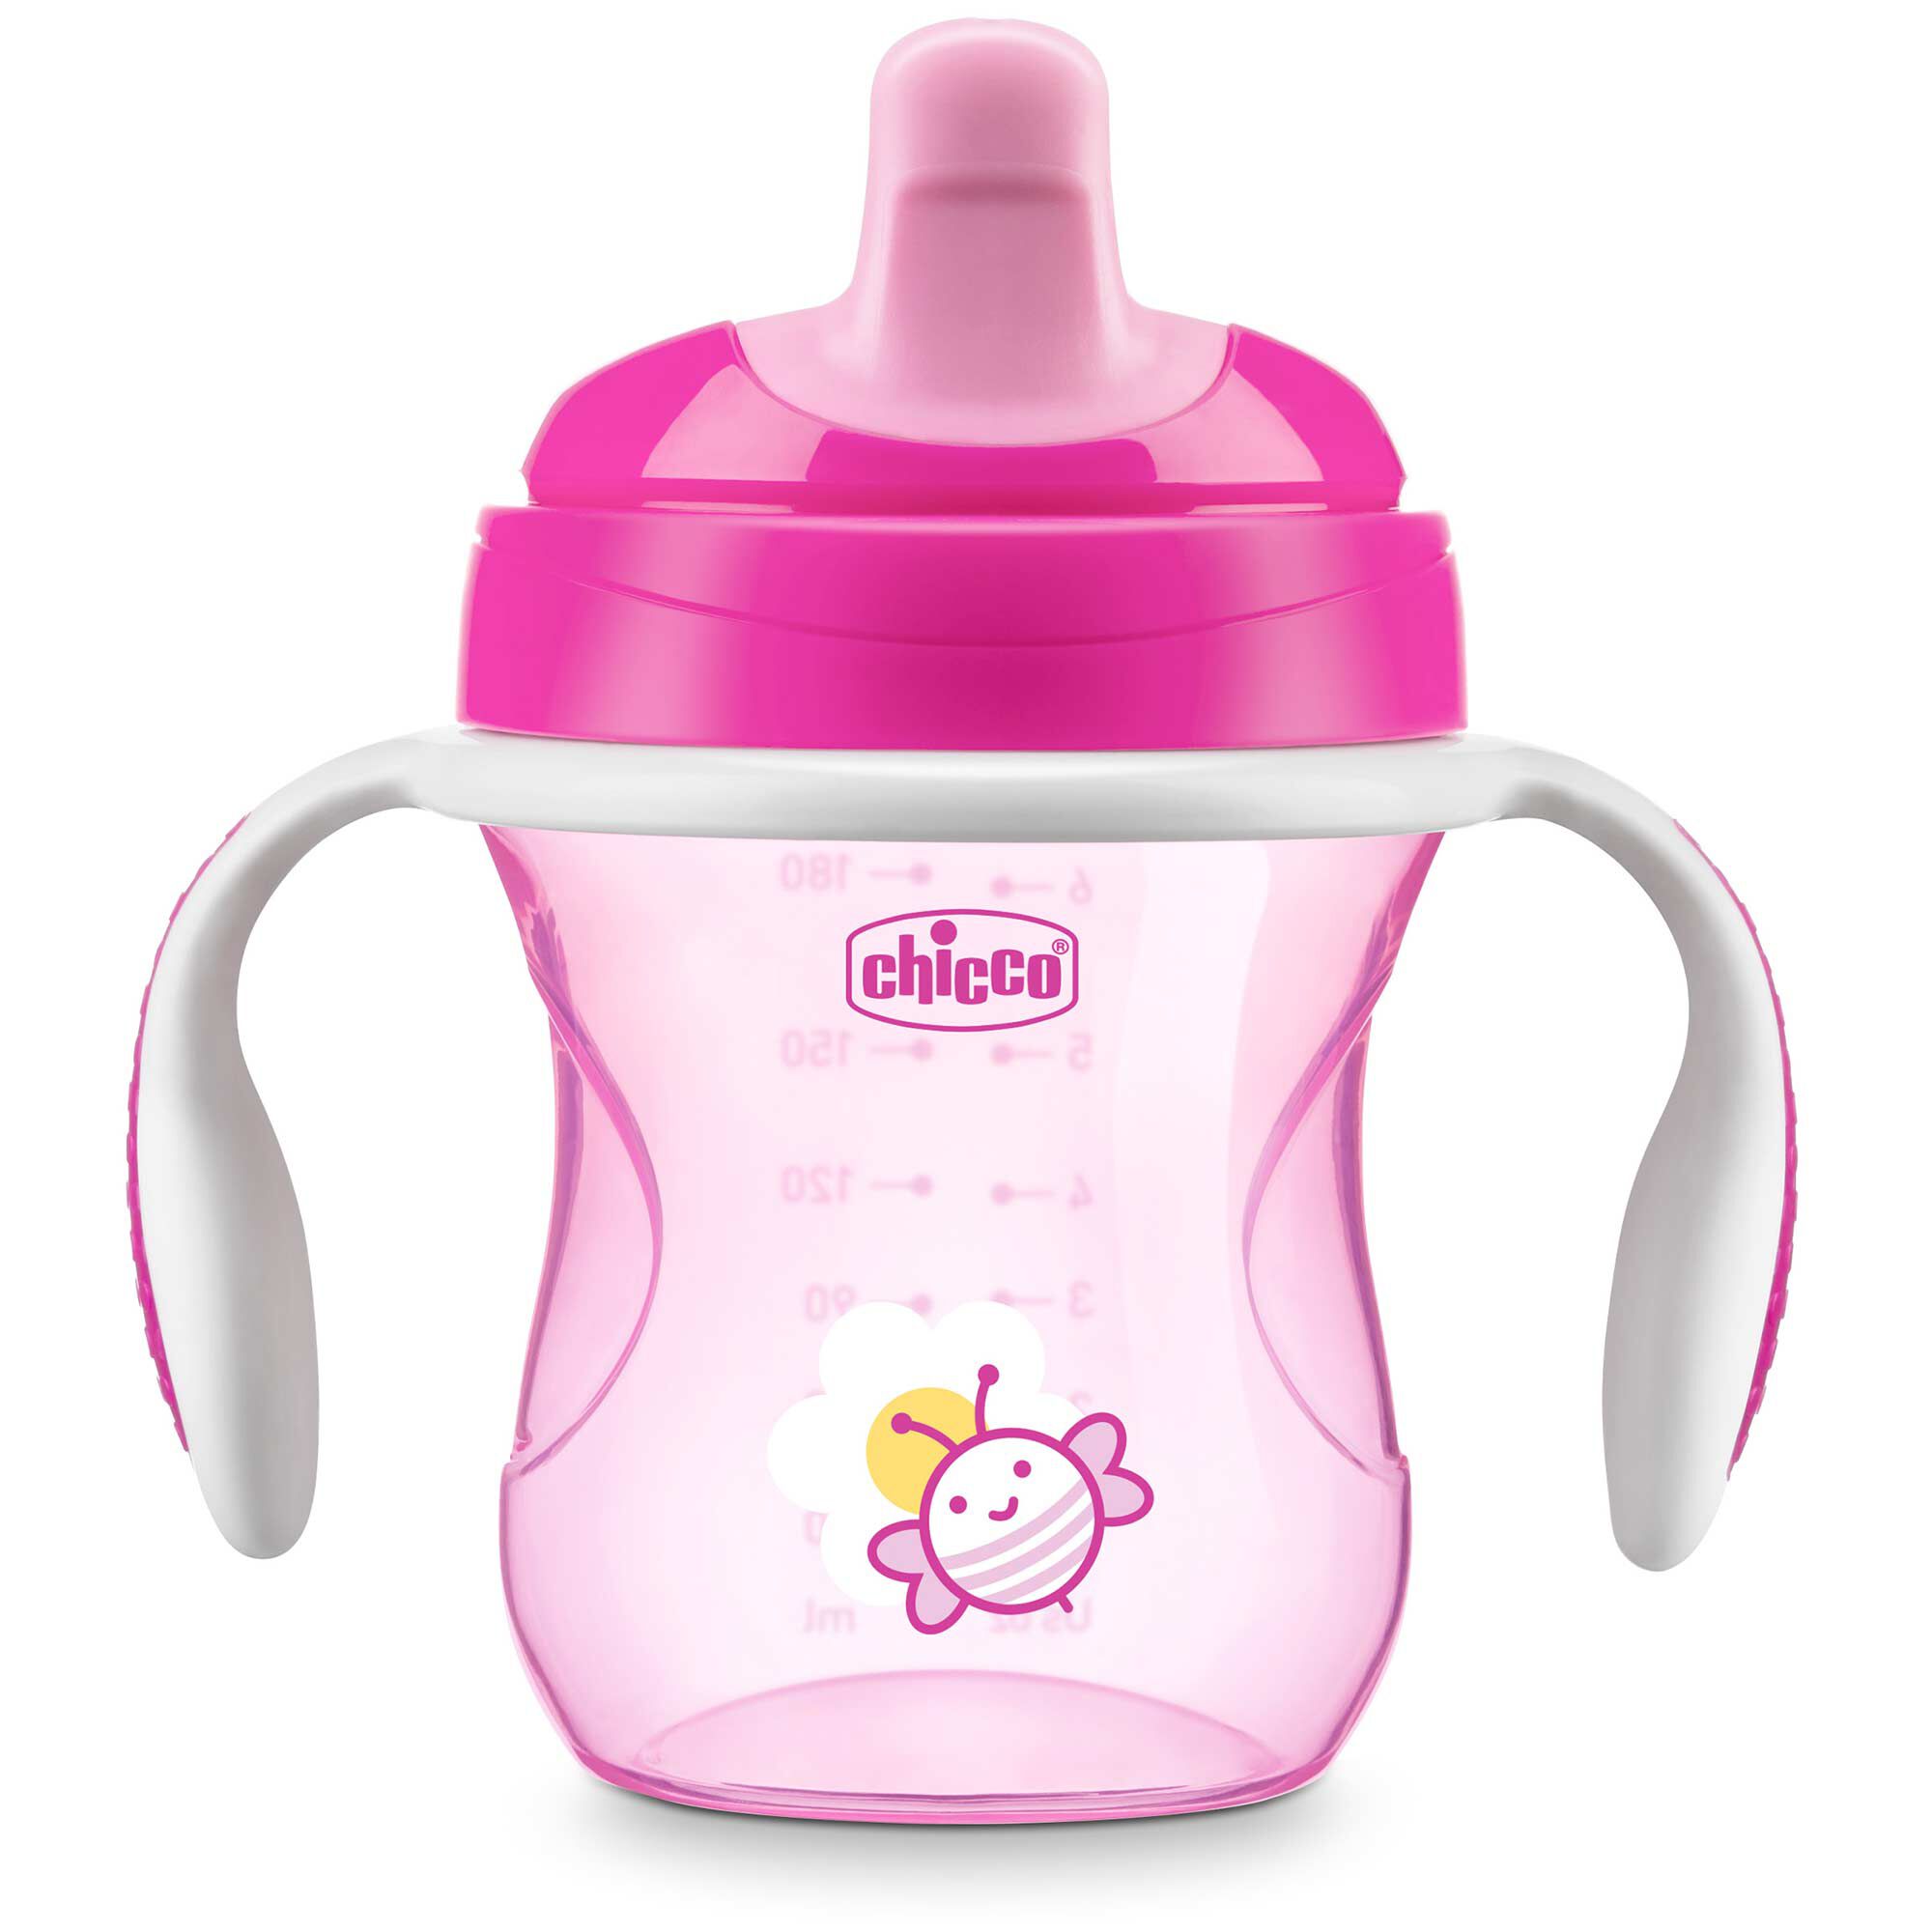 https://www.chiccousa.com/dw/image/v2/AAMT_PRD/on/demandware.static/-/Sites-chicco_catalog/default/dw4626e52d/images/products/Nursing/Cups/chicco-semi-soft-spout-trainer-cup-7oz-6m-pink.jpg?sw=2000&sh=2000&sm=fit